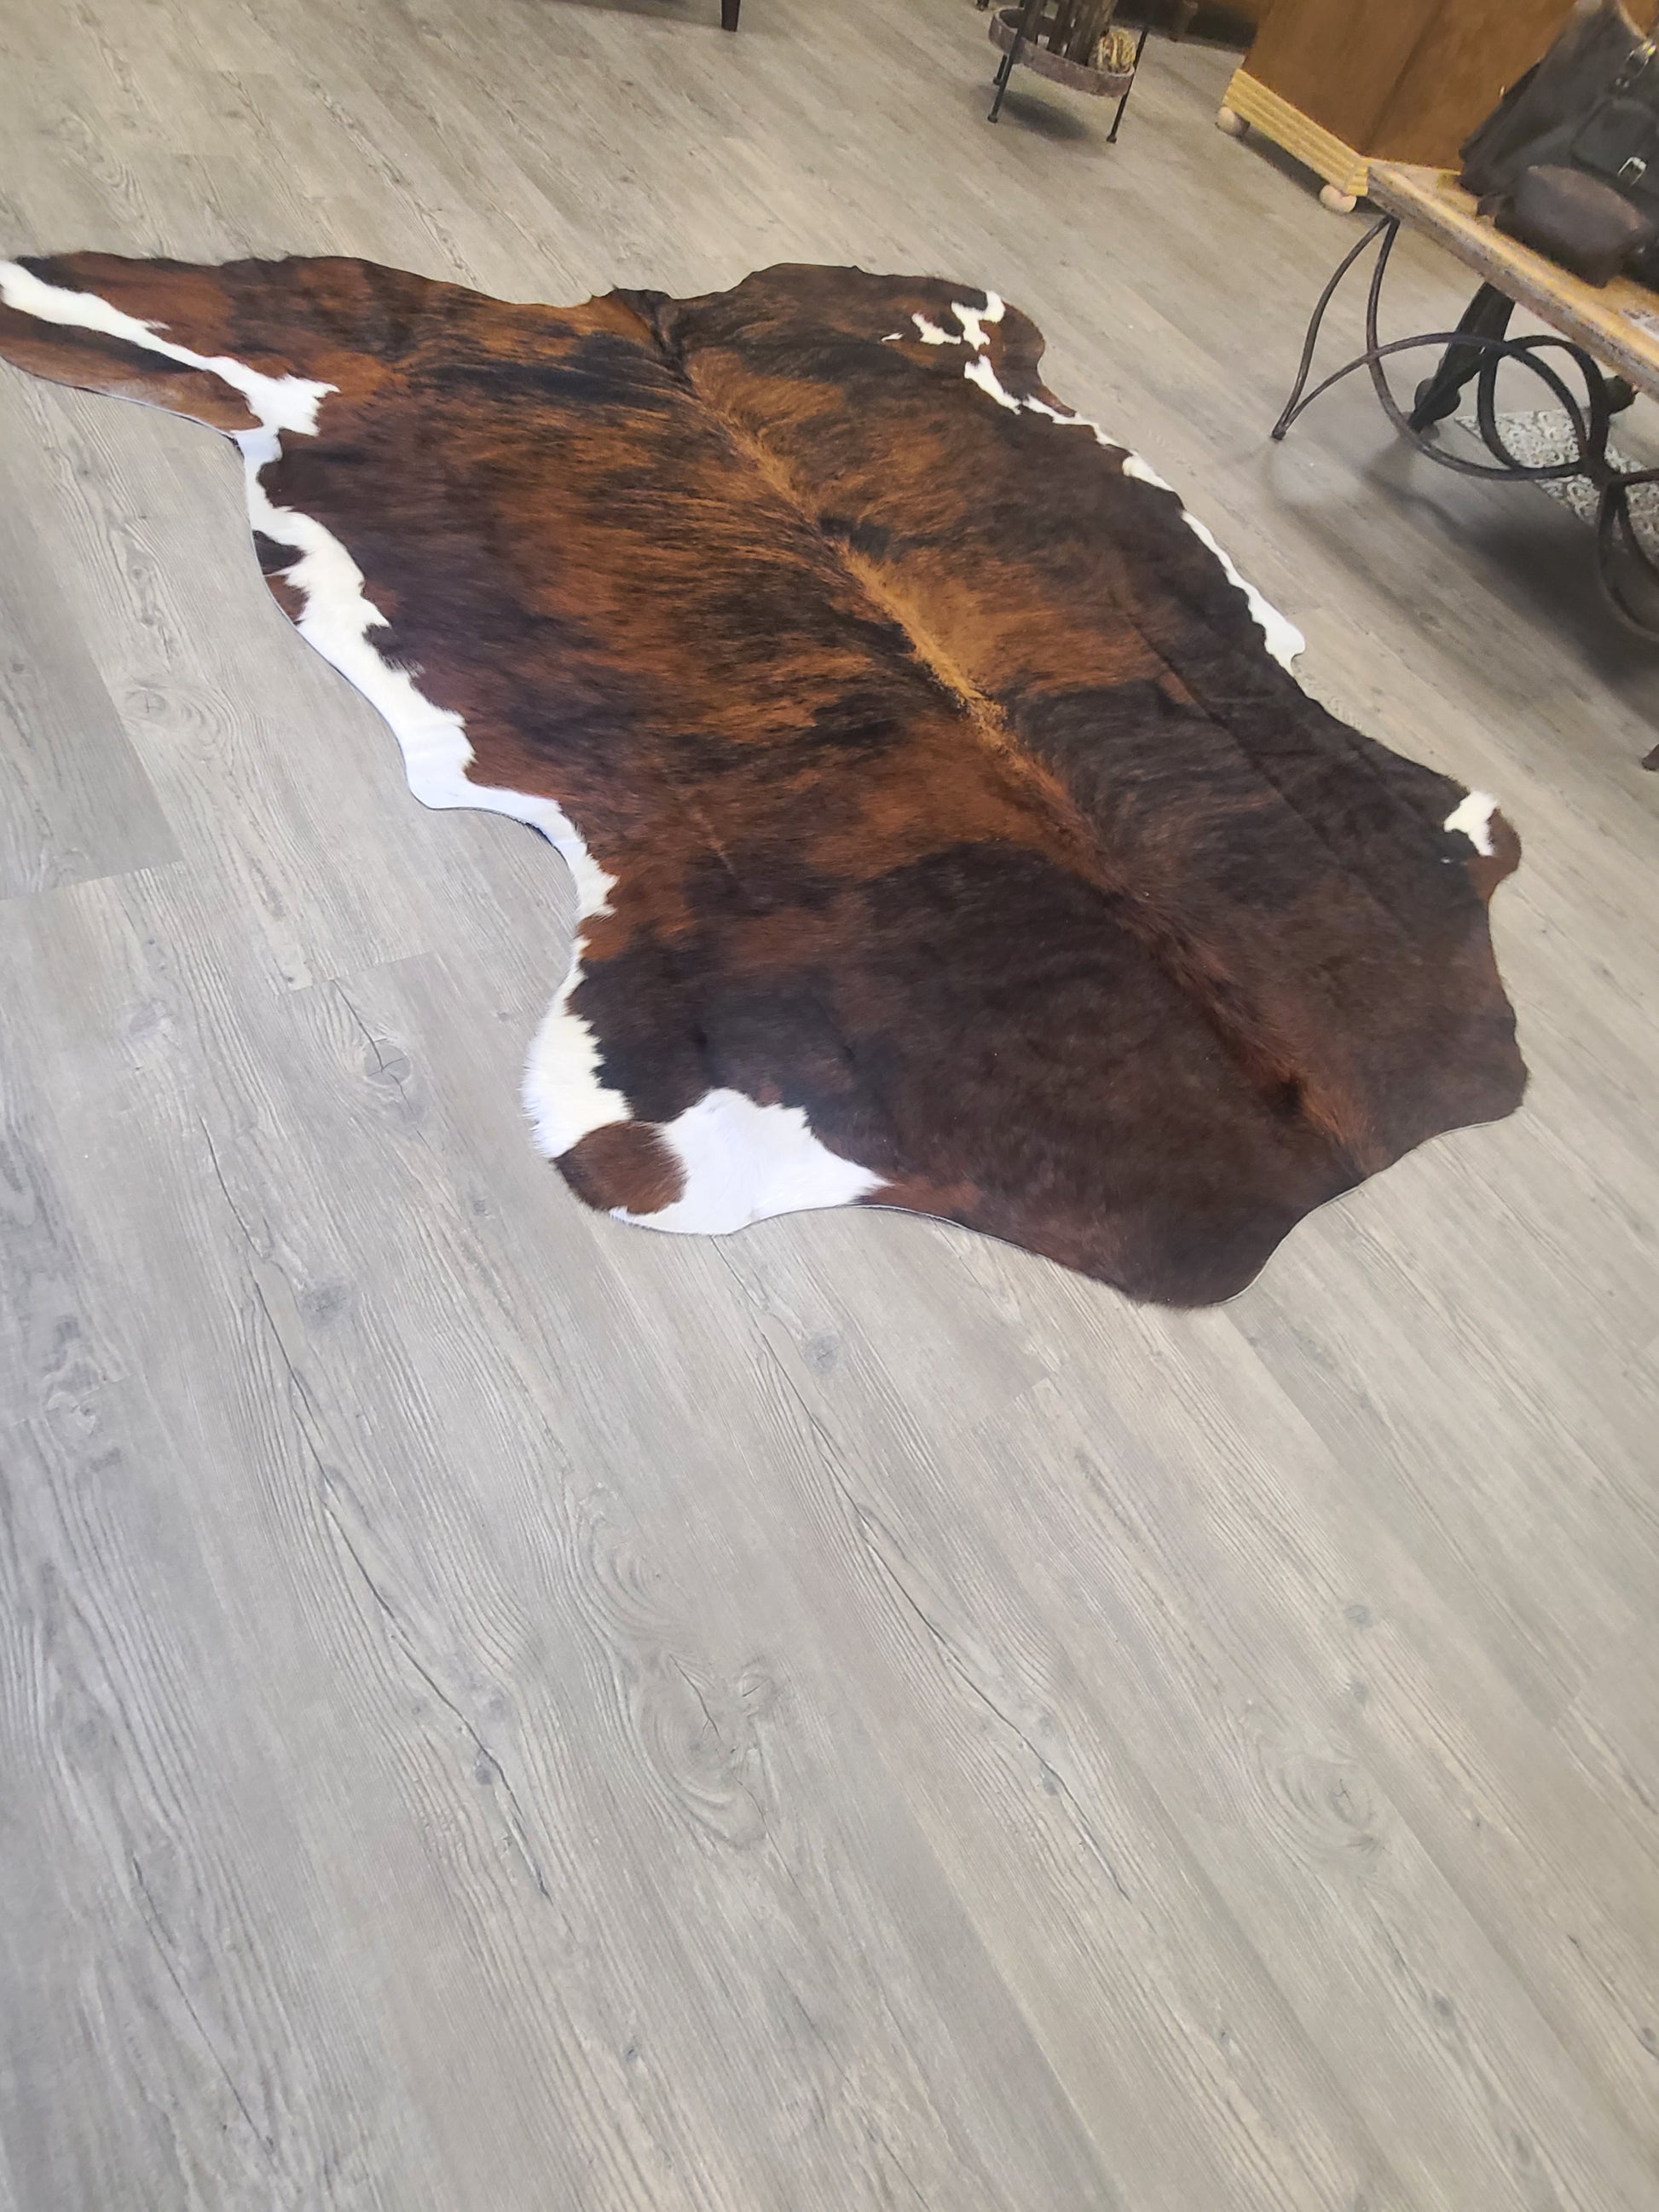 Brazilian Cowhide Rug - Dark White Belly Brindle - 8 ft x 6 ft-Status Co. Leather Studio